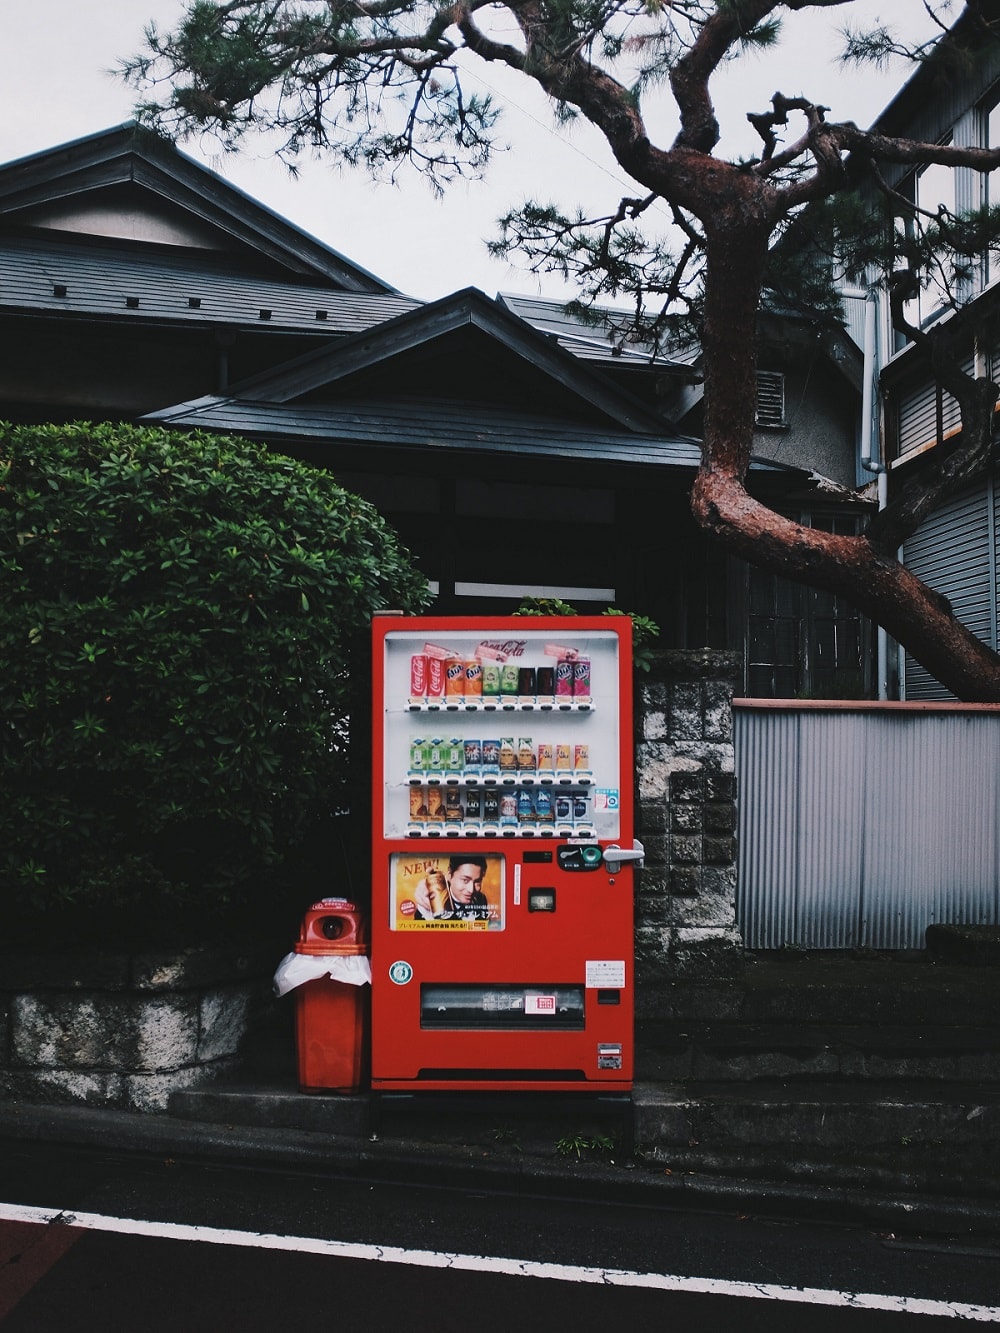 Mysterious Aesthetic Of Japanese Streets - Travel - Design. / Visual.